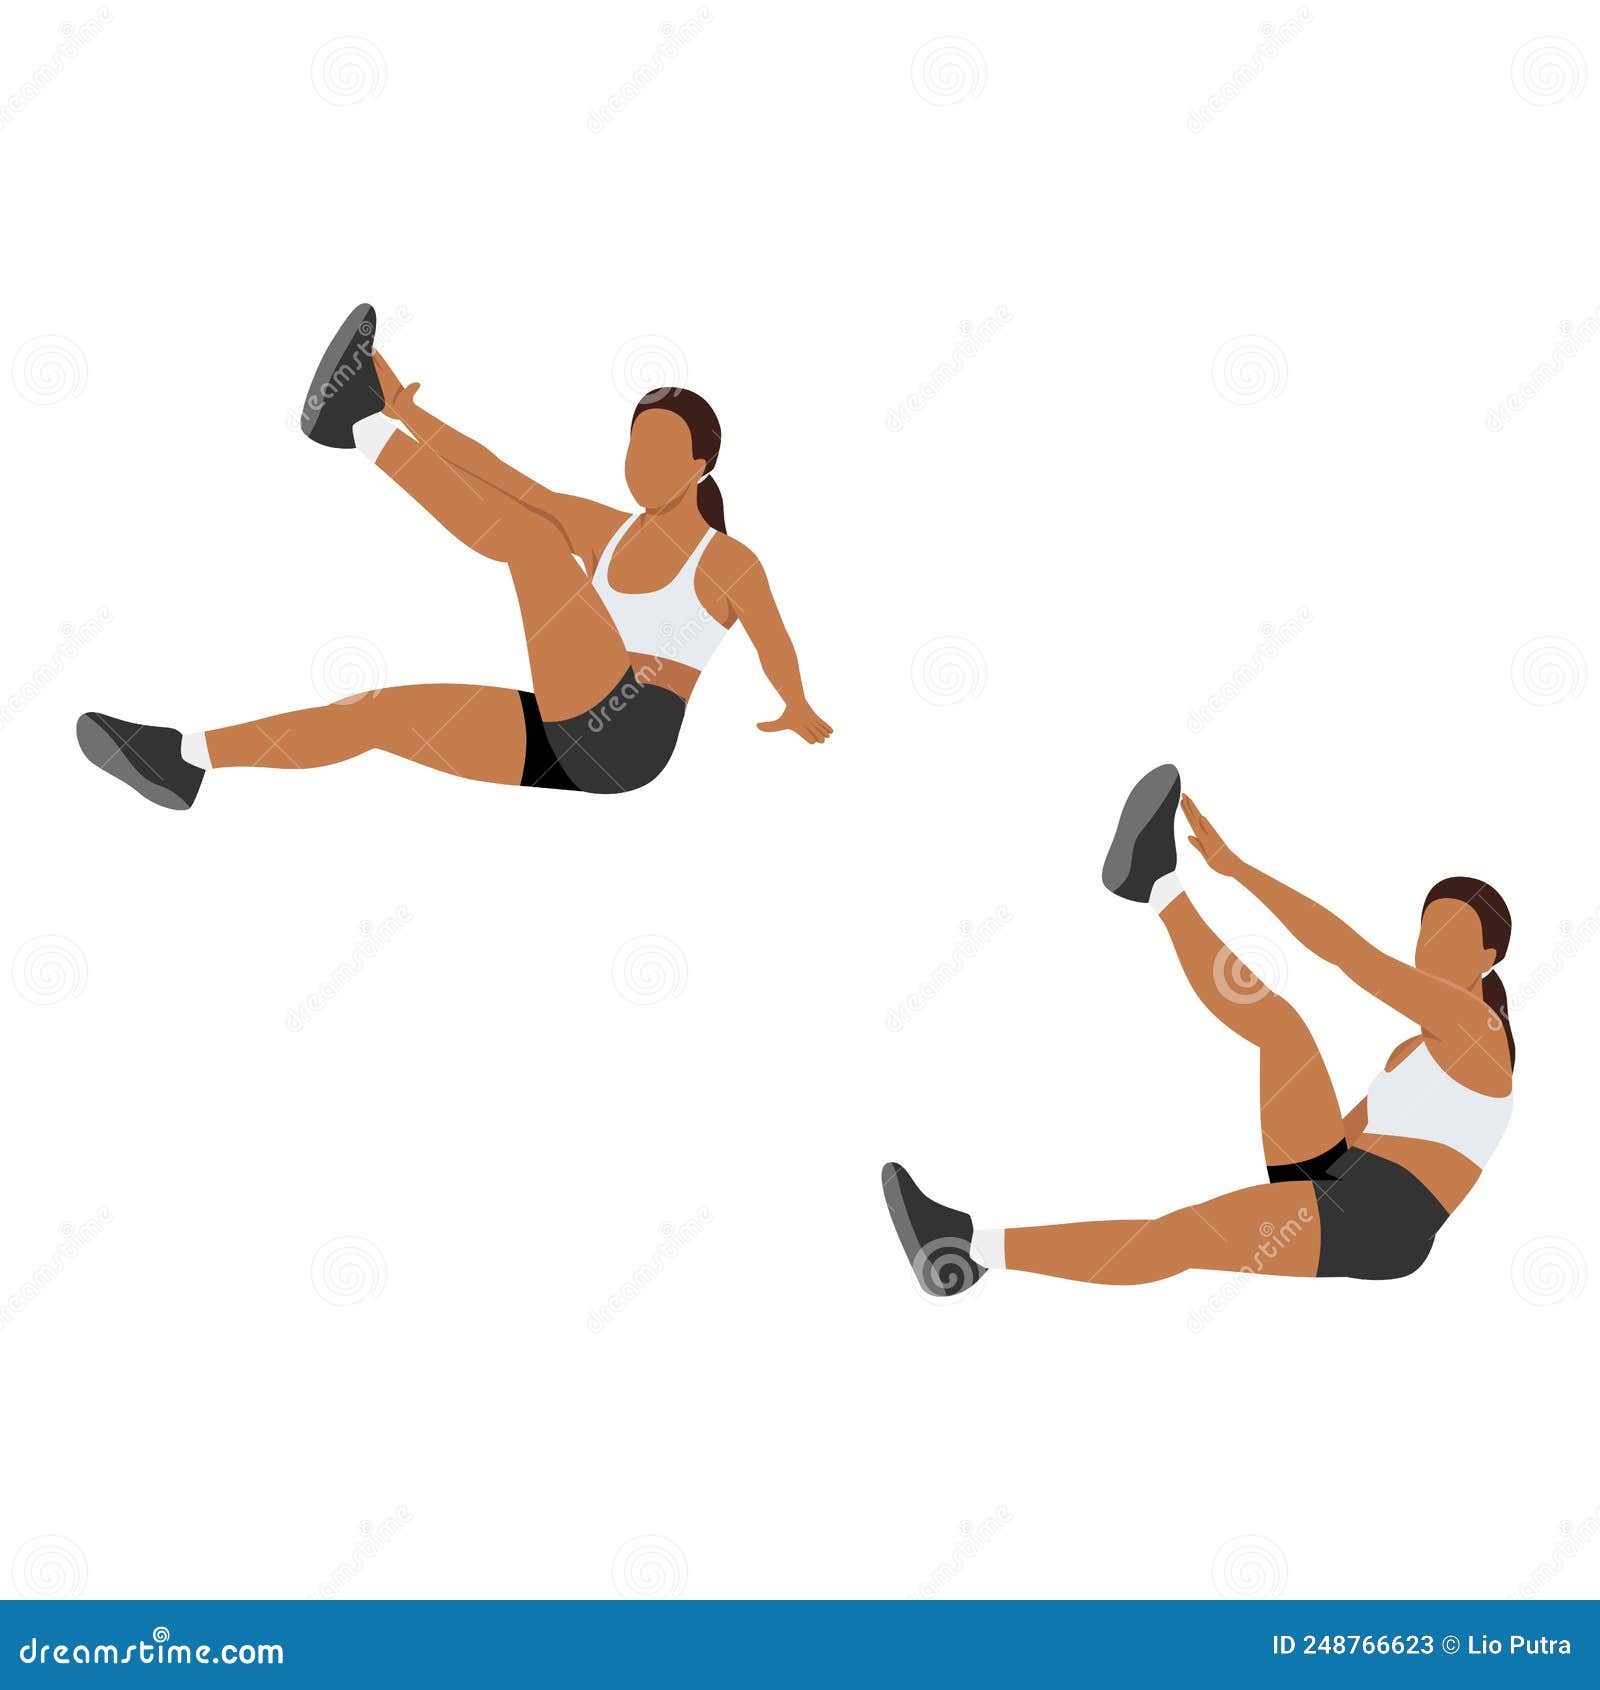 woman doing star toe touch sit ups exercise.